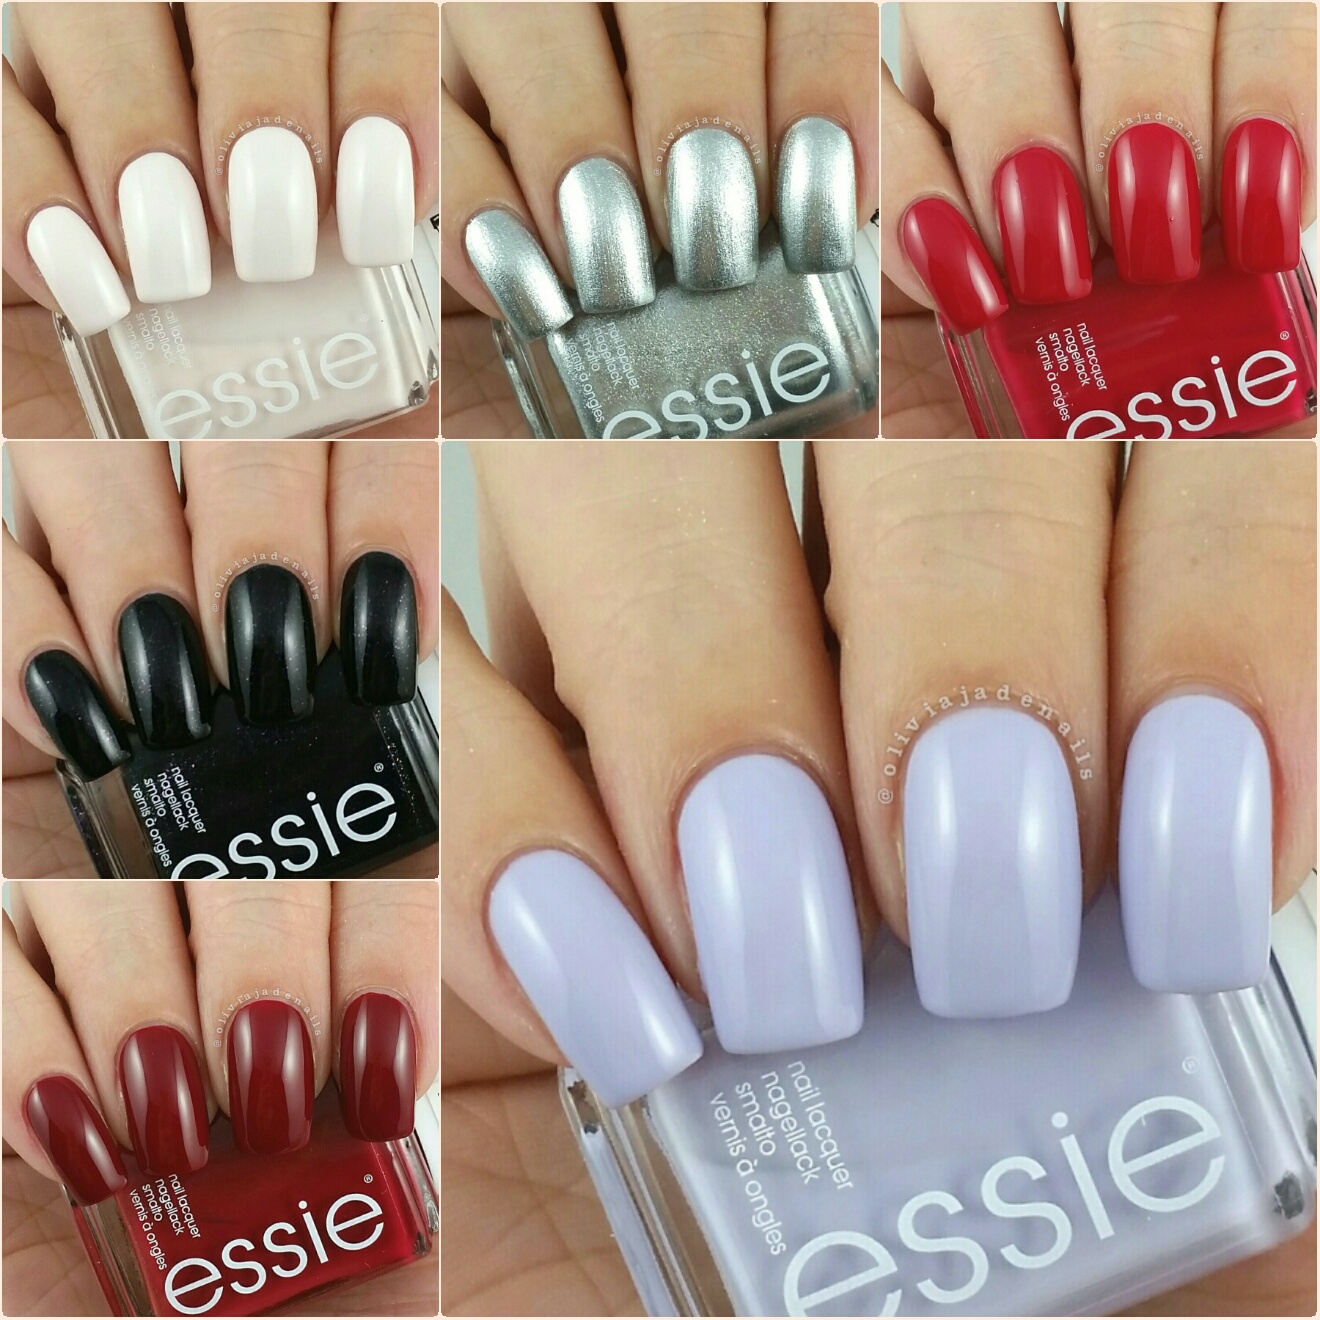 Olivia Jade Nails: Essie Winter 2016 Collection - Swatches & Review